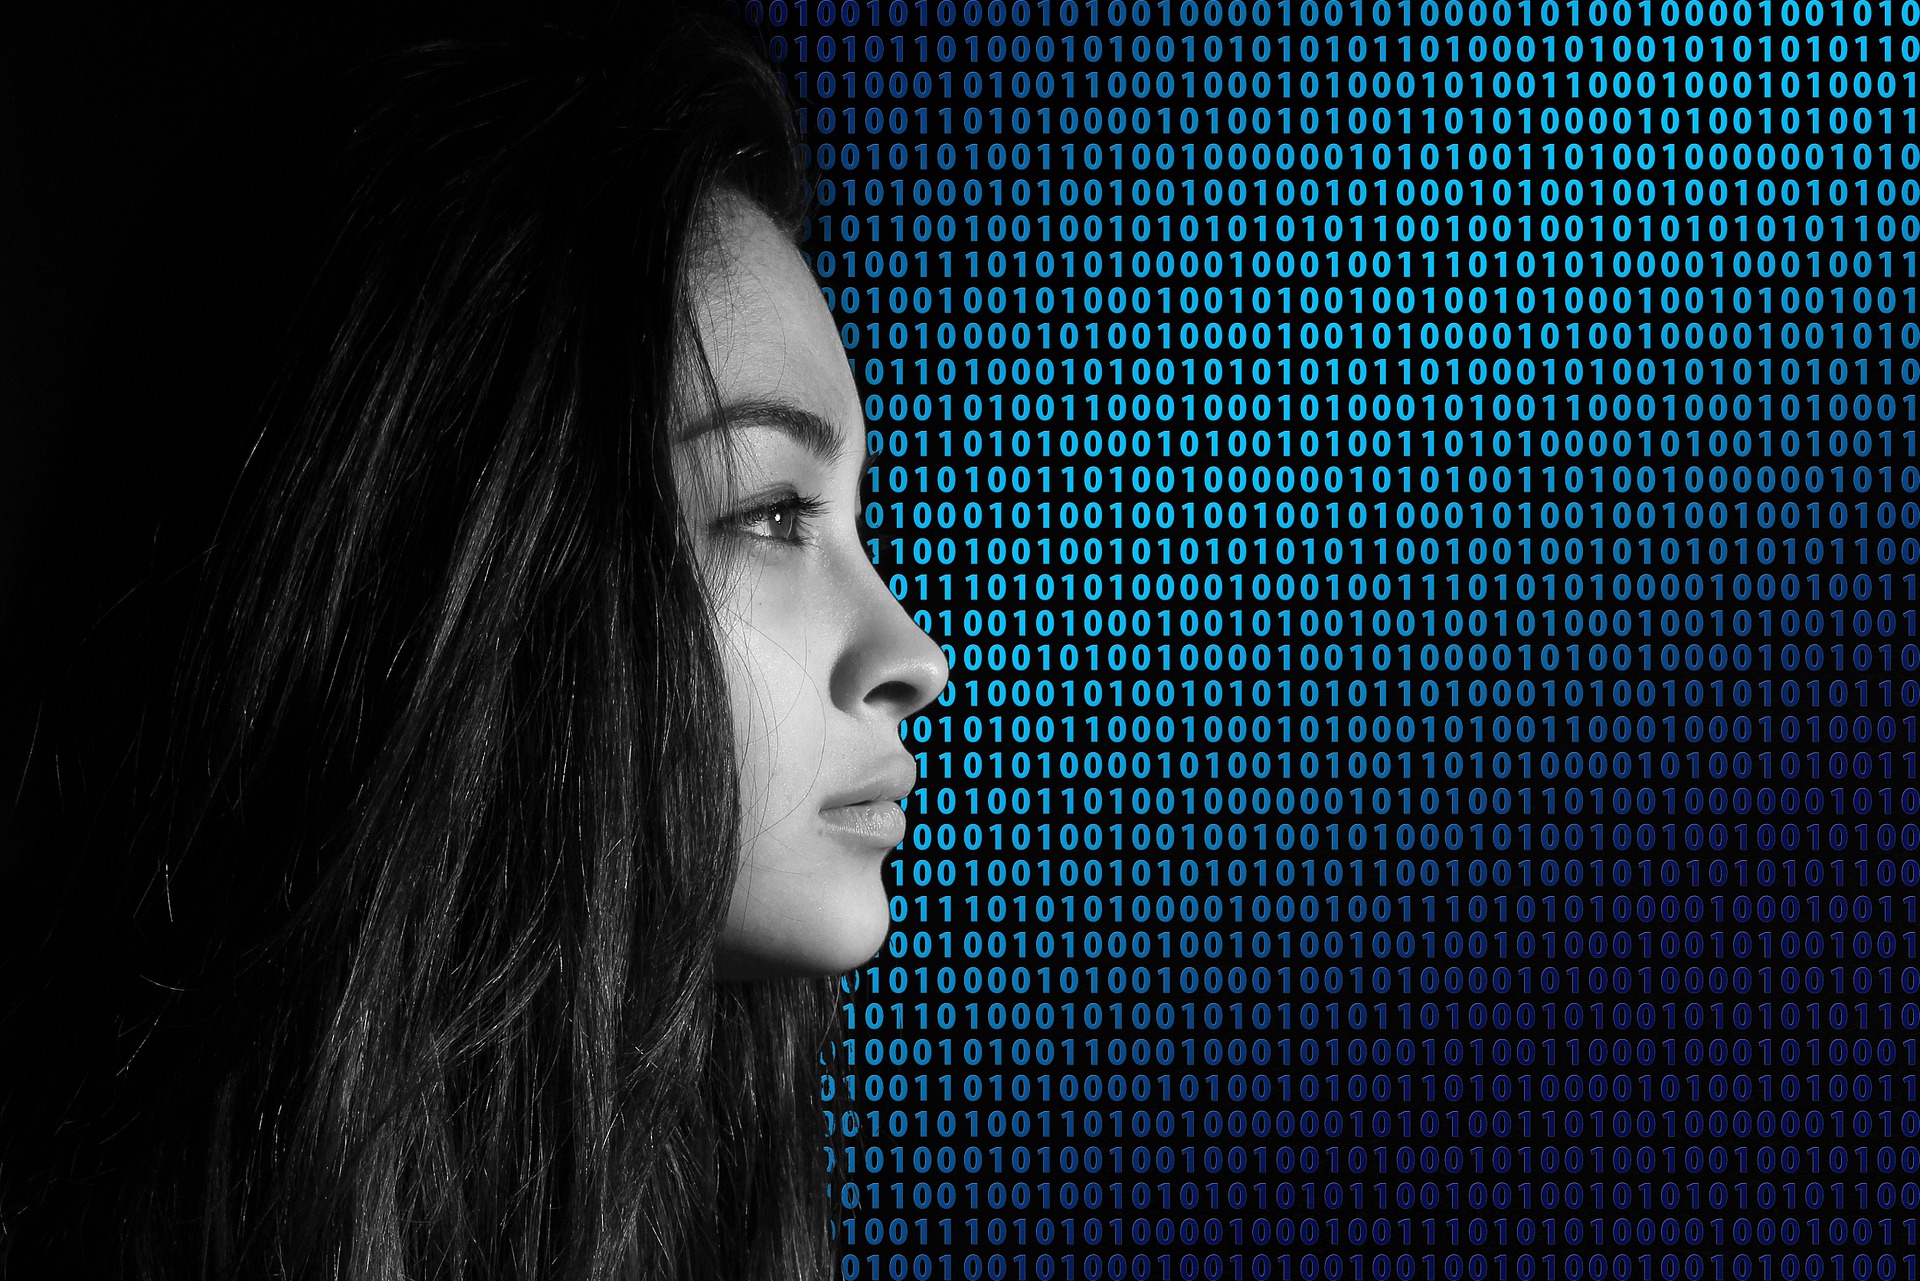 Woman looking at a stream of binary data